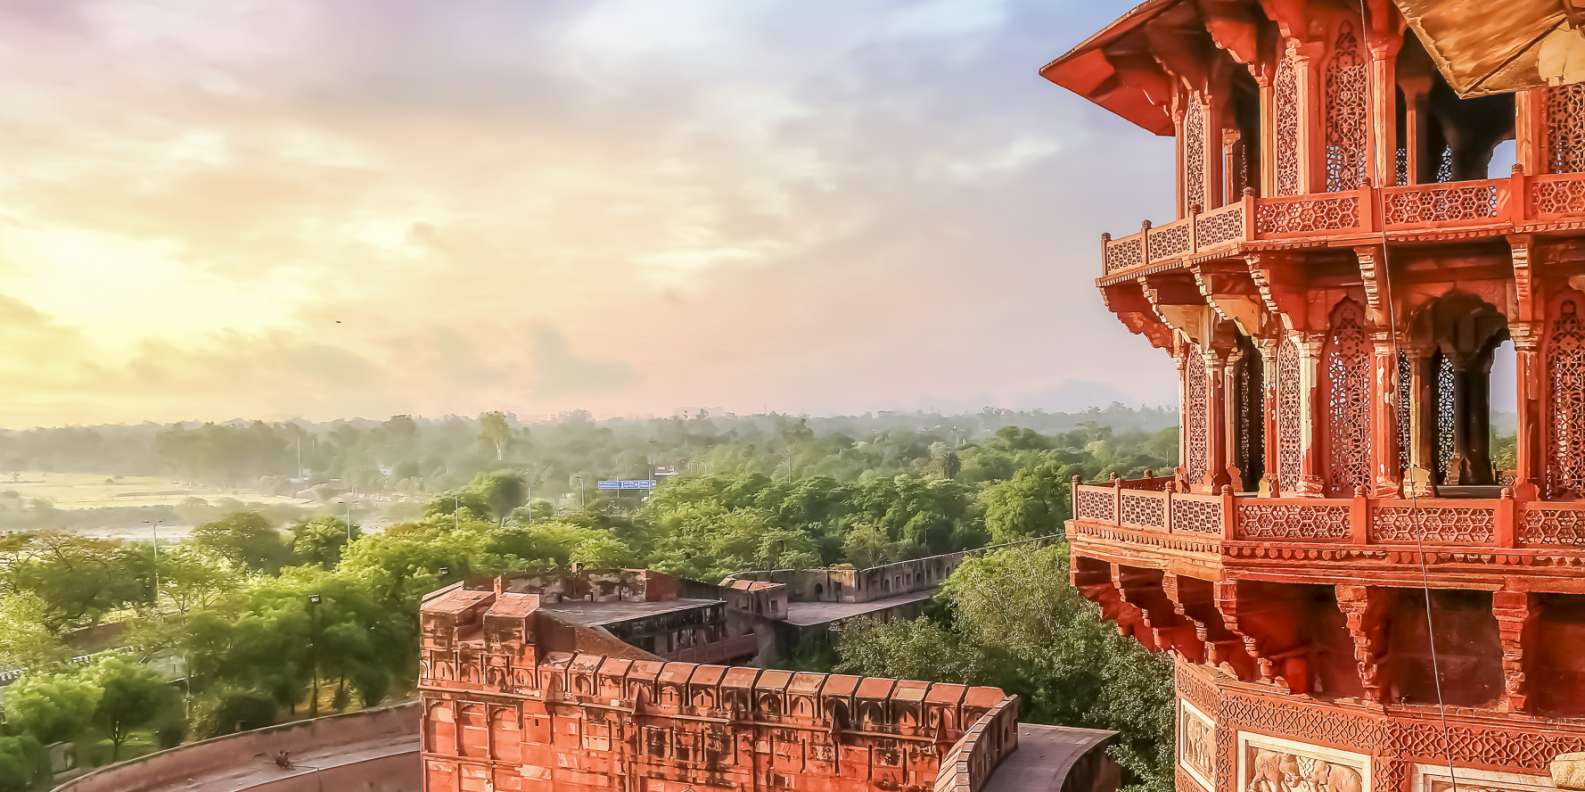 Agra Fort, Agra - Book Tickets & Tours | GetYourGuide